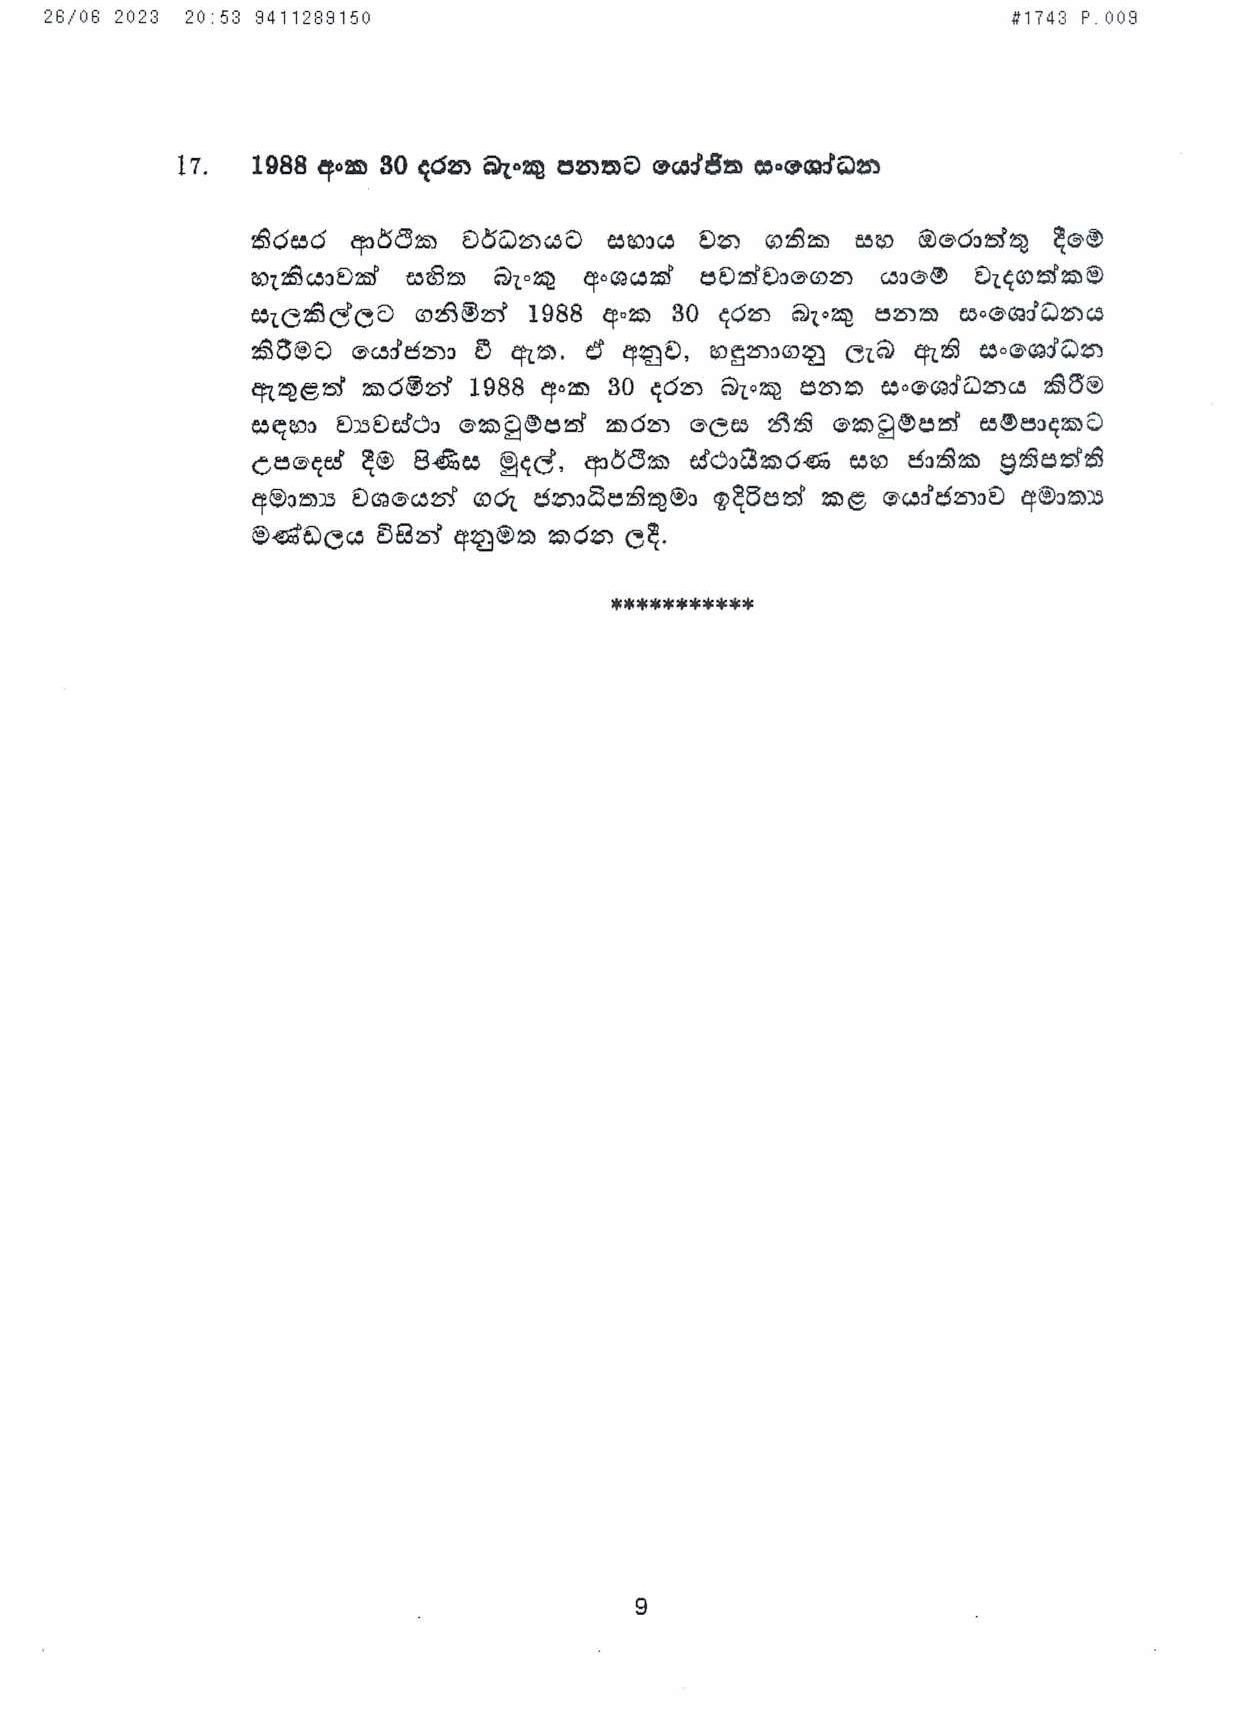 Cabinet Decision on 26.06.2023 page 009